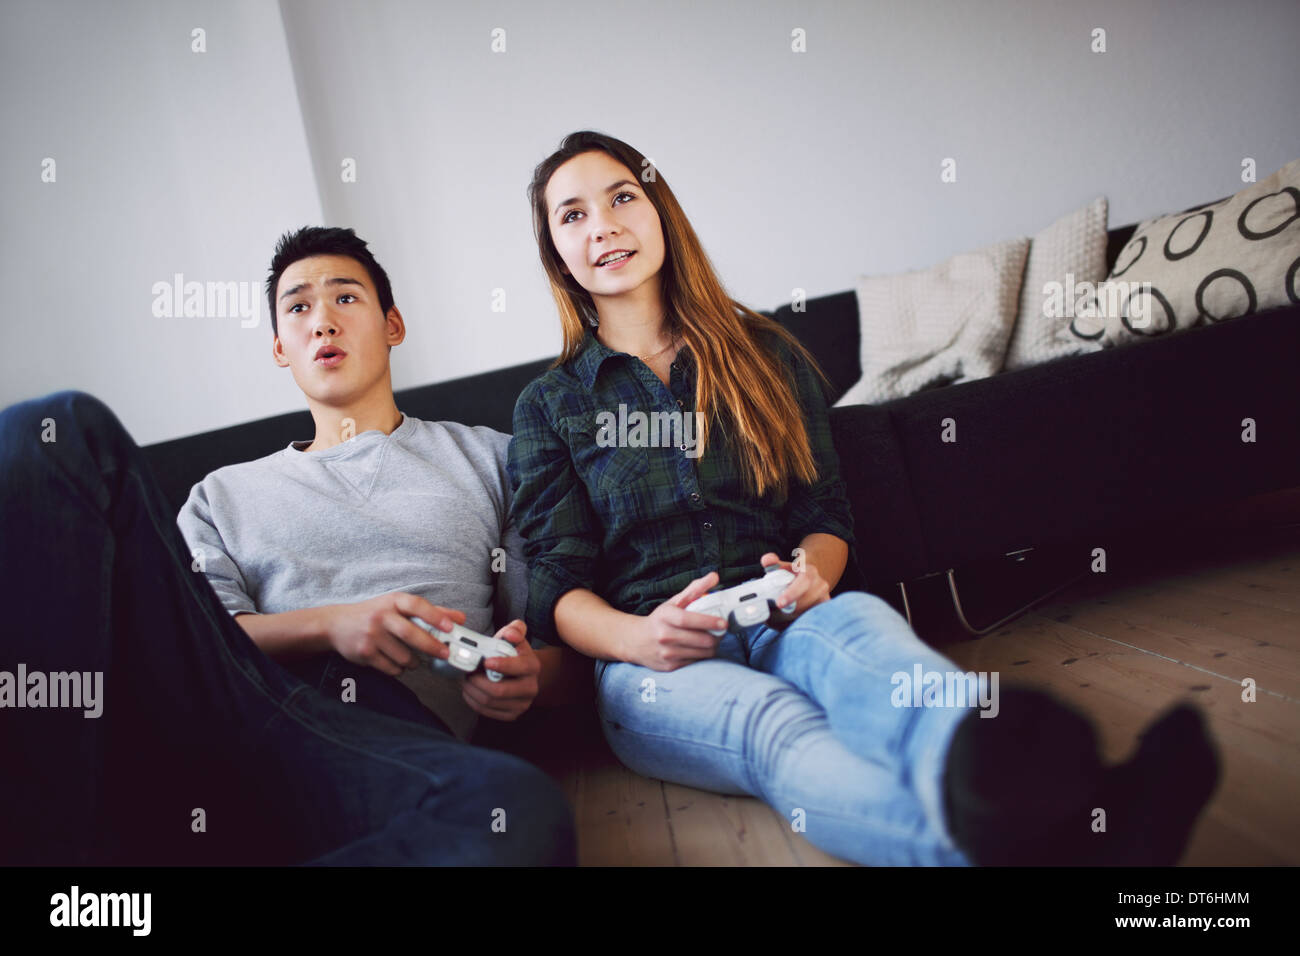 6,047 Young Couple Playing Console Games Images, Stock Photos, 3D